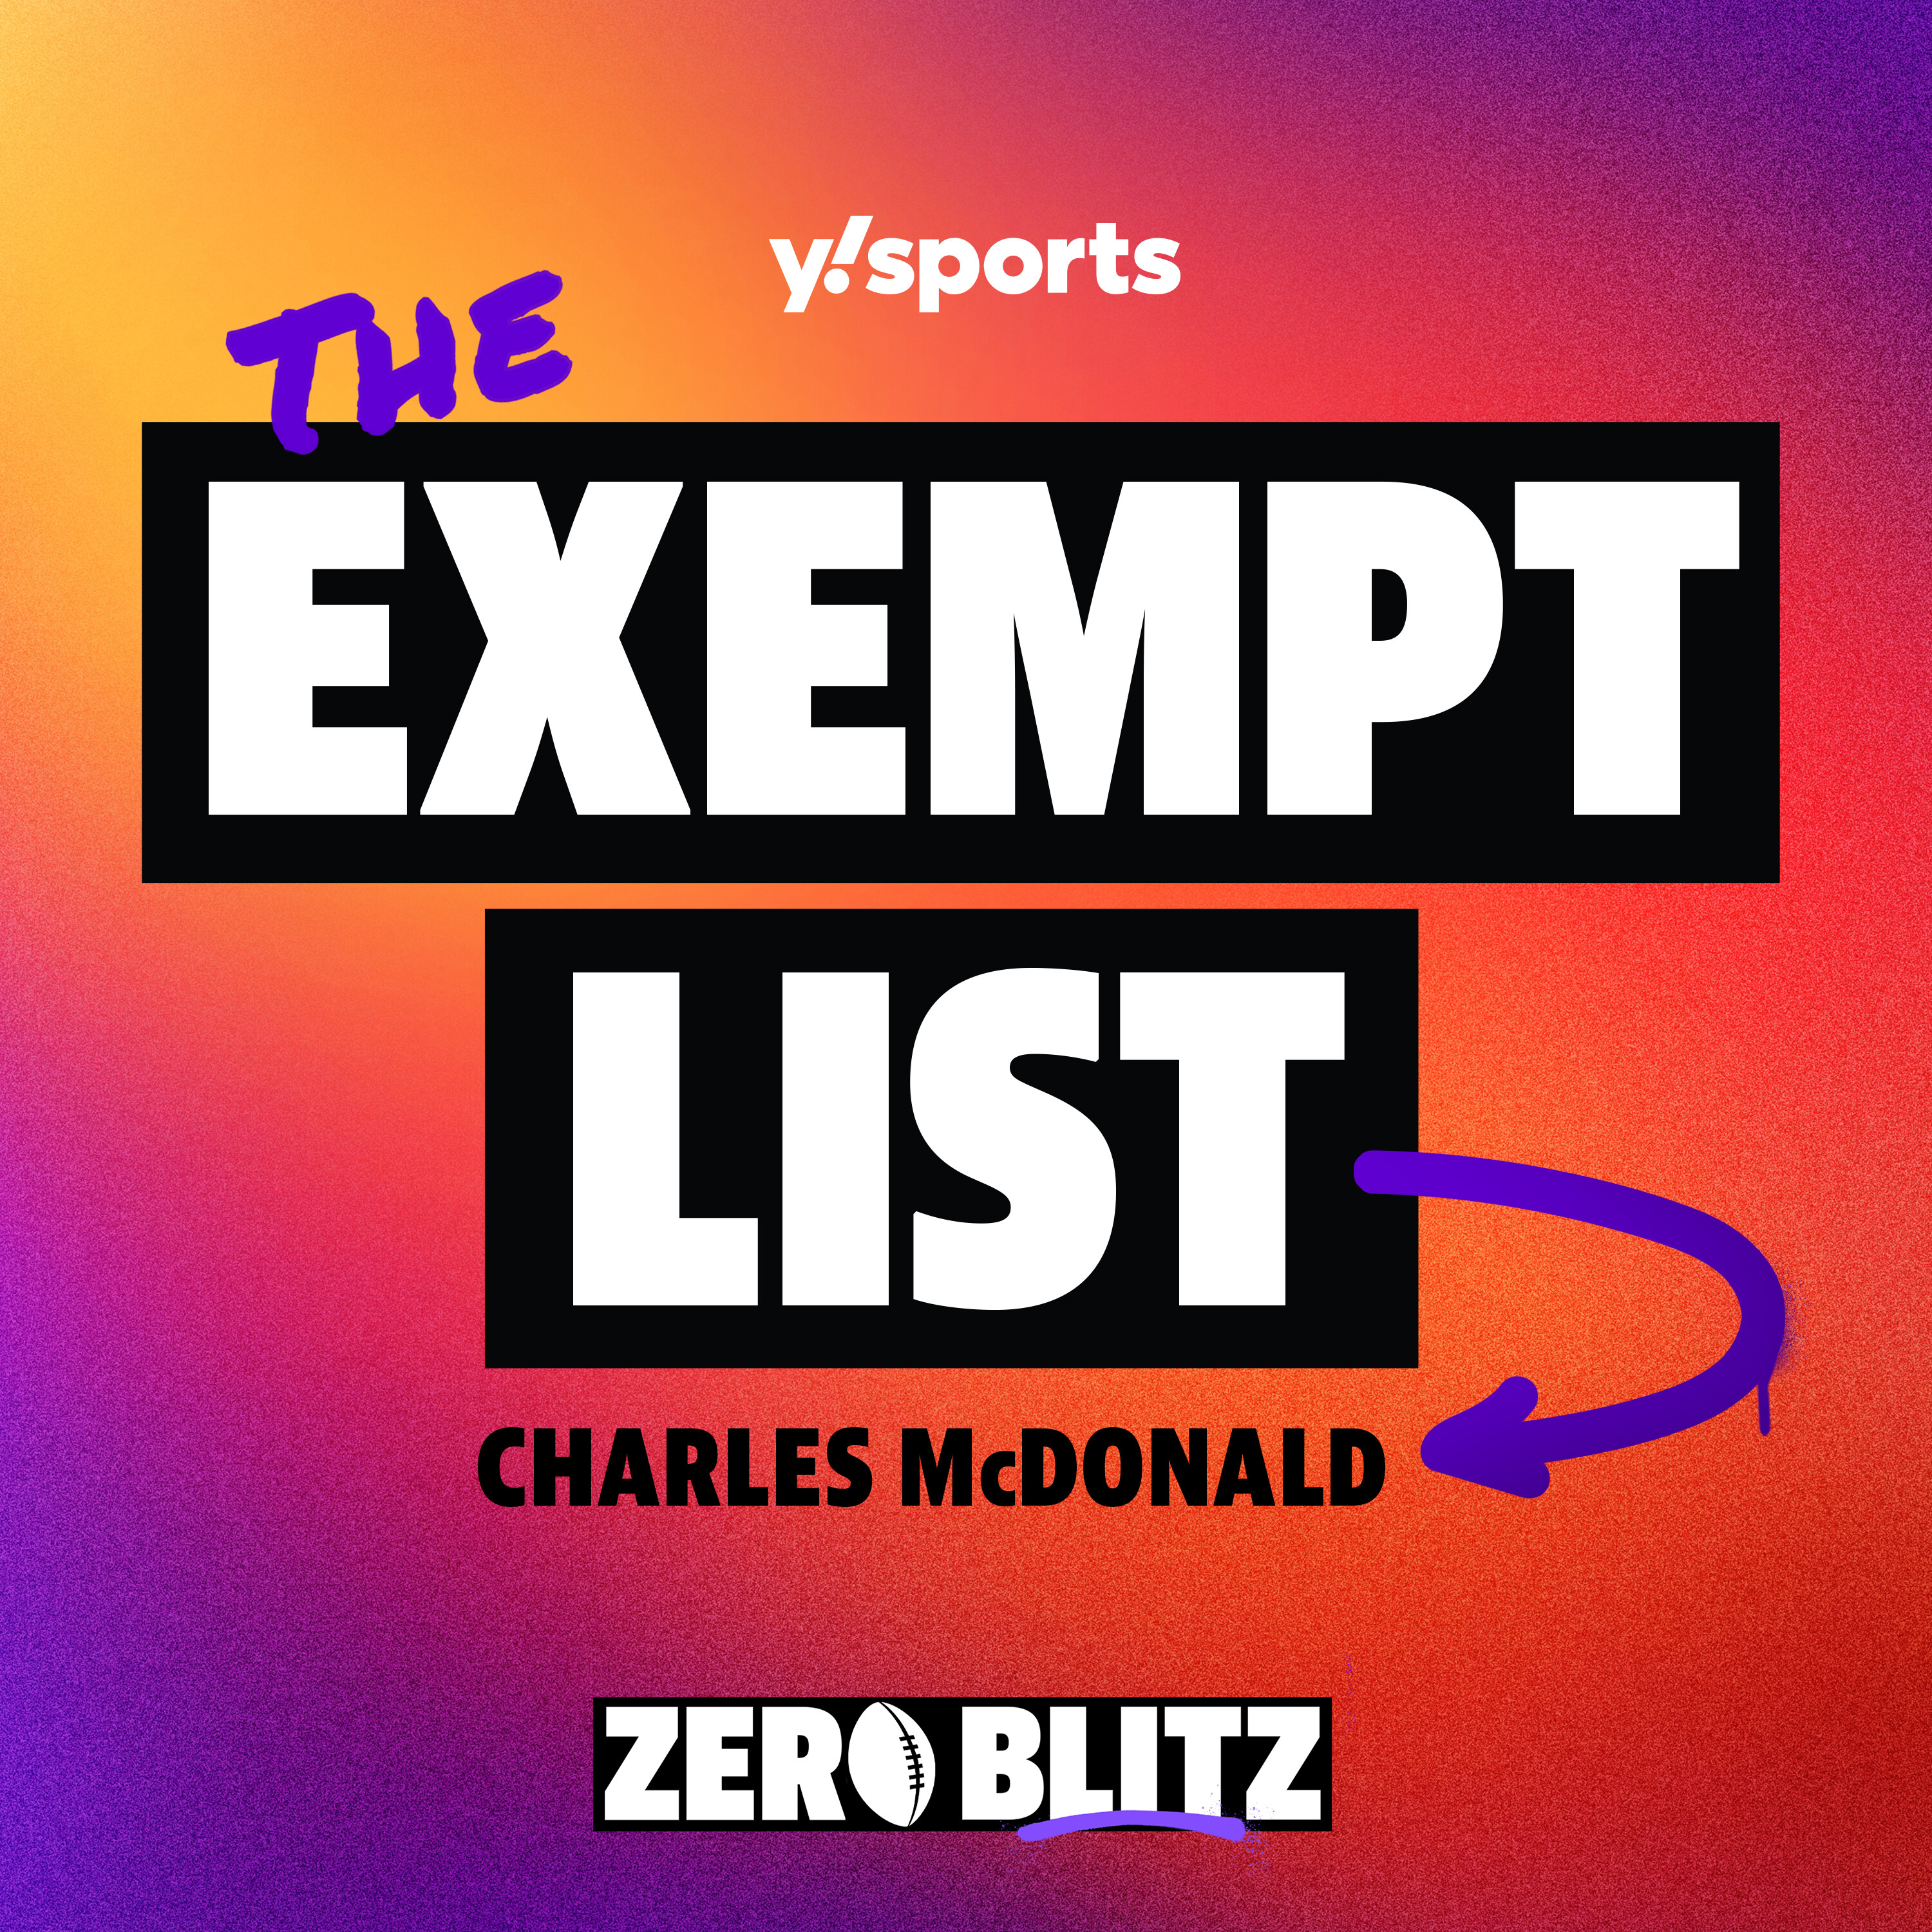 Teams that will define the draft + Cooper Dejean is a corner with Dominique Foxworth | The Exempt List